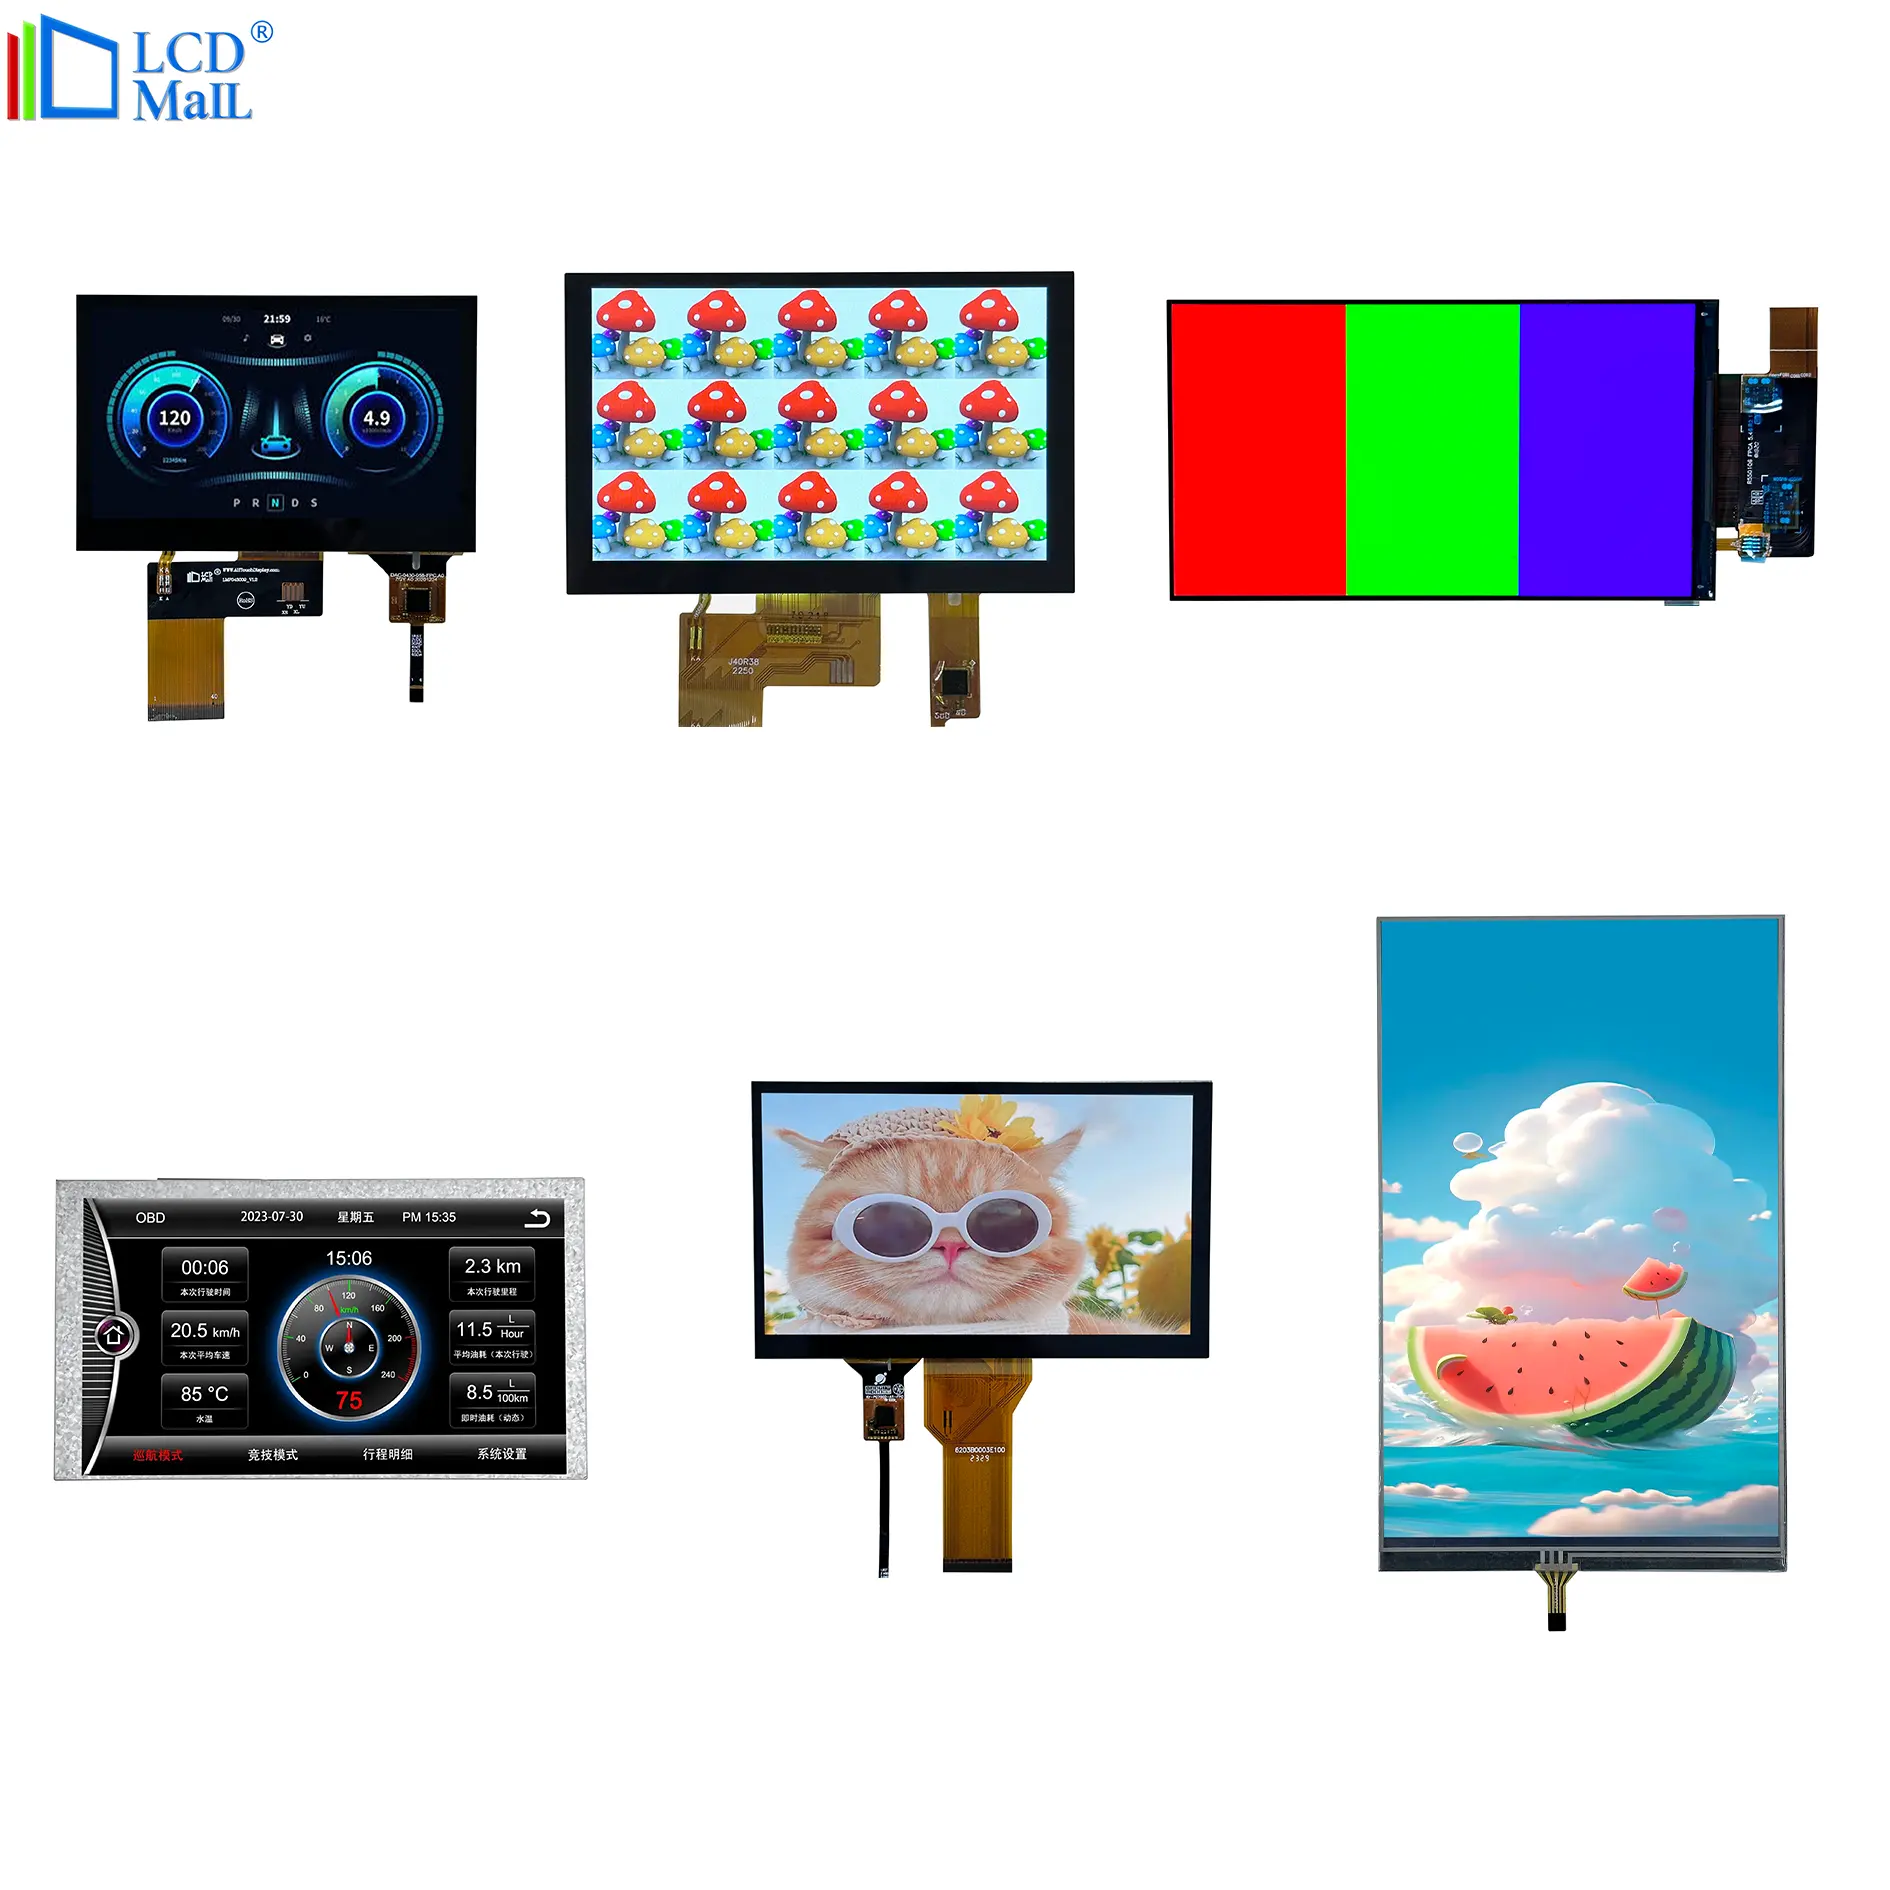 LCD Mall Full Size 0.96'' 1.46'' 4.3'' 7.0'' 10.1'' 15.6'' OEM LVDS Interface Tft Lcd Touch Panel Screen Display Module